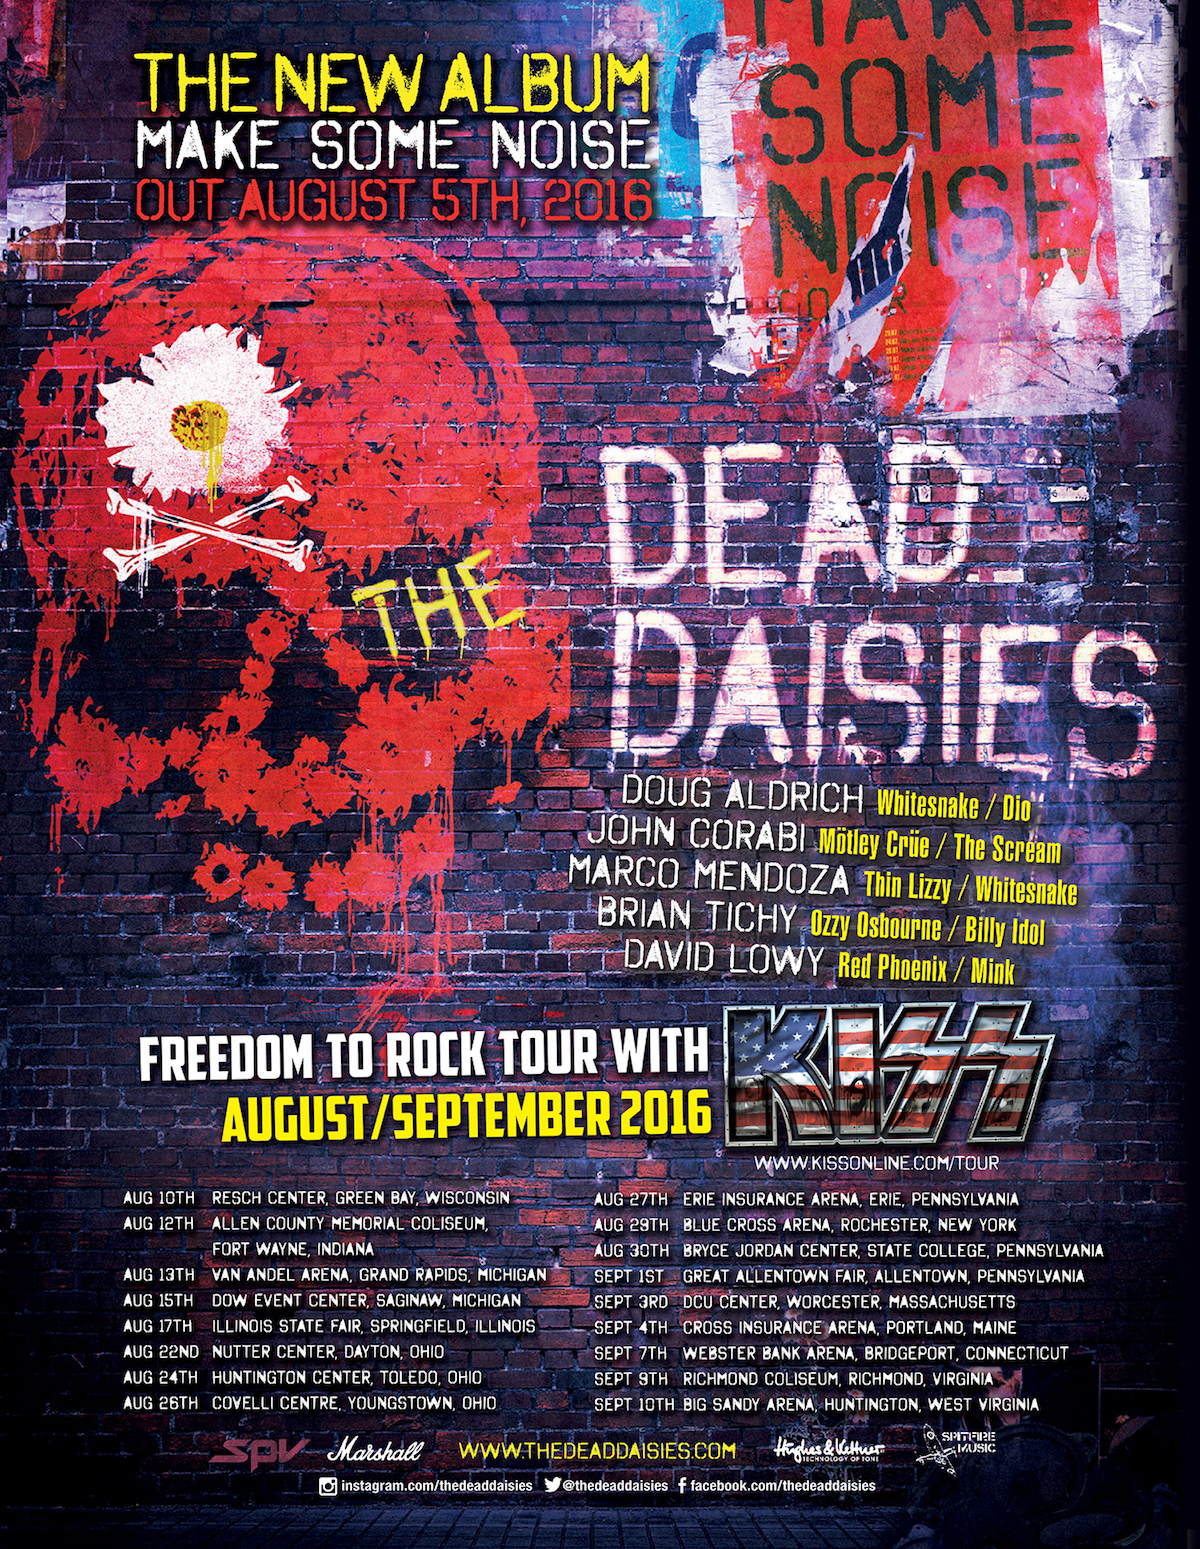 Catch The Dead Daisies on tour this summer!